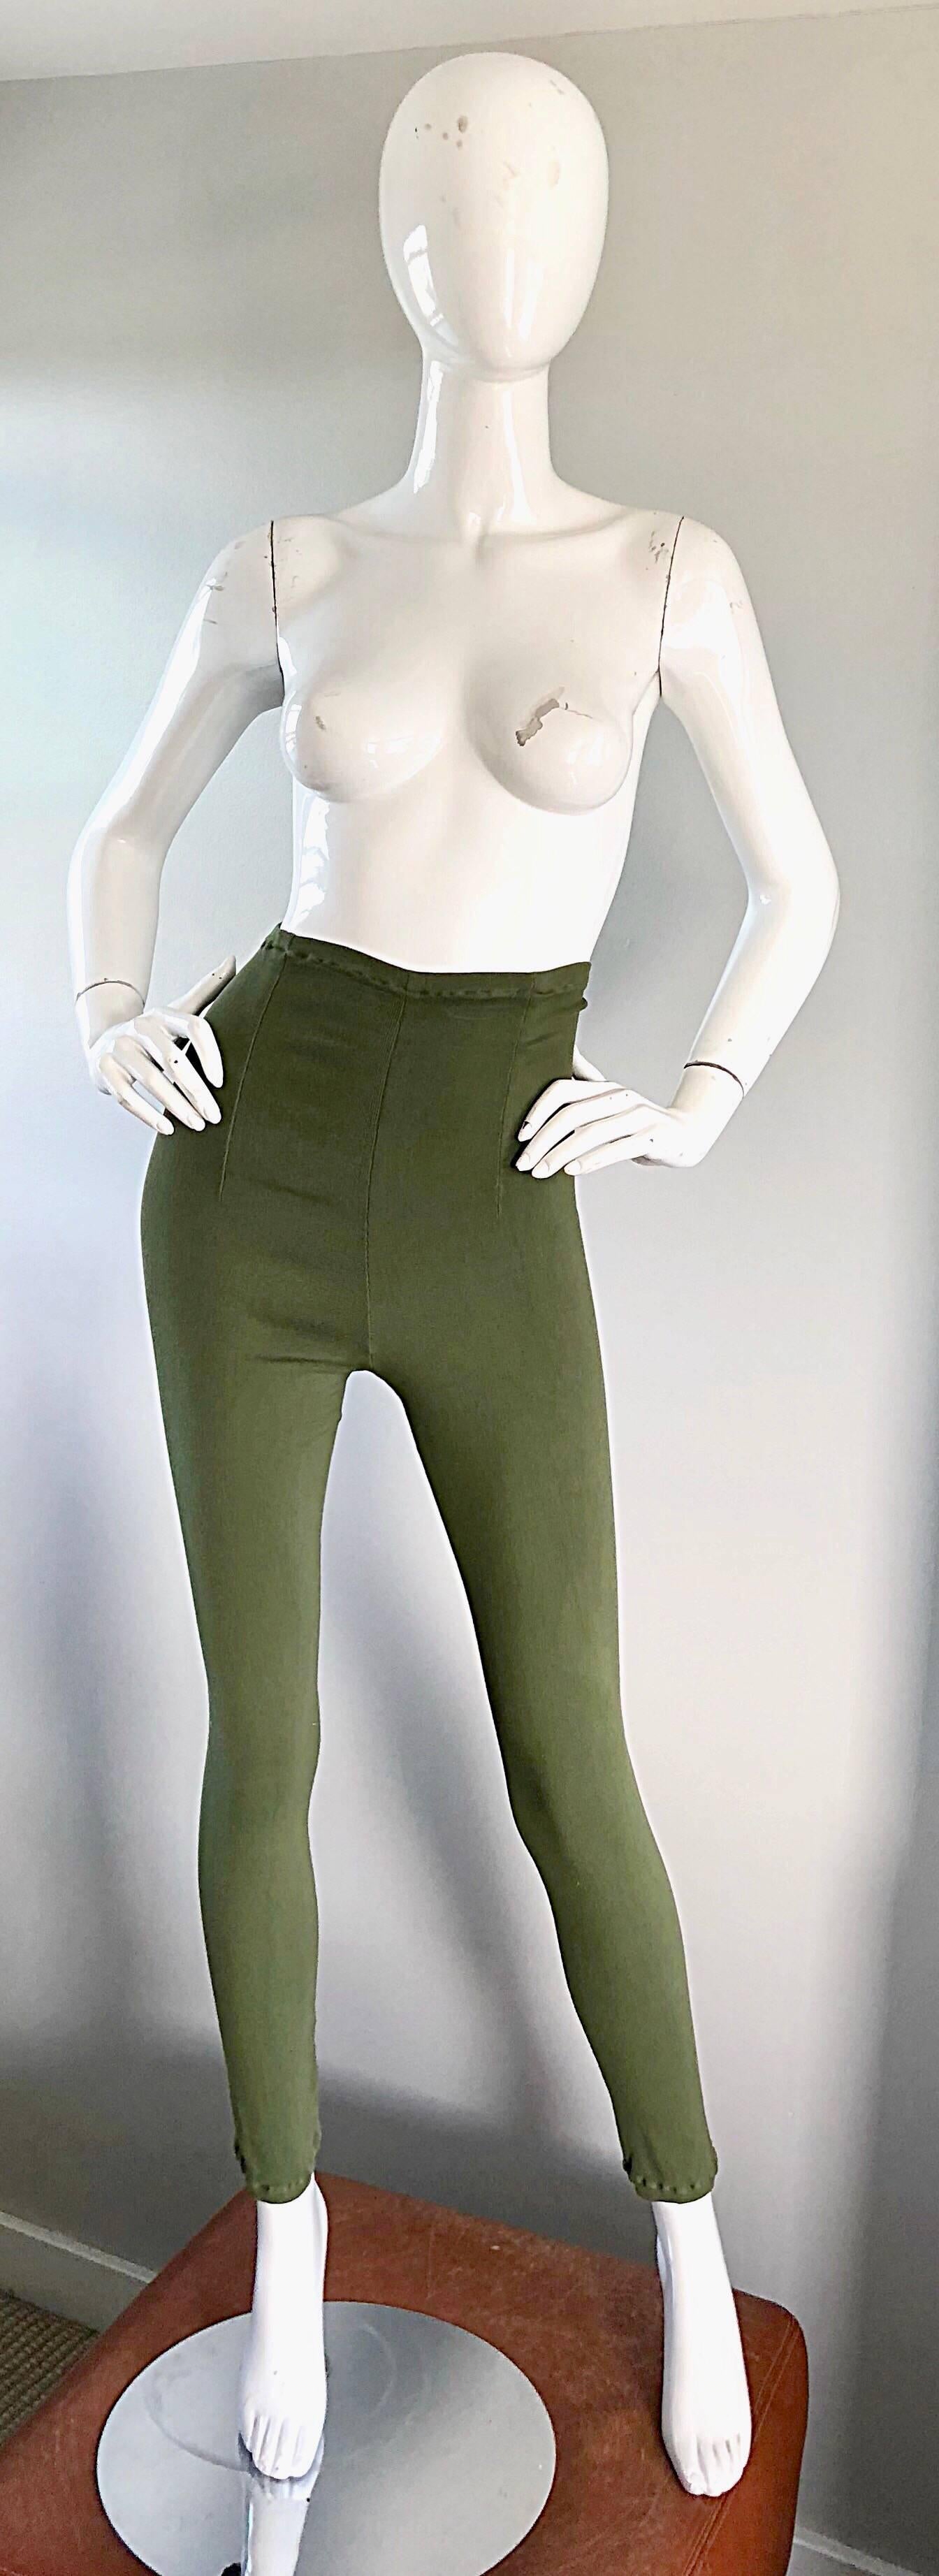 90s GHOST OF LONDON olive green ultra high waisted leggings / skinny pants! Features a soft Rayon blend that stretches to fit (73% Rayon, 24% Nylon, 3% Lycra). In great condition. Made in England
Approximately Size Small - Medium (tons of